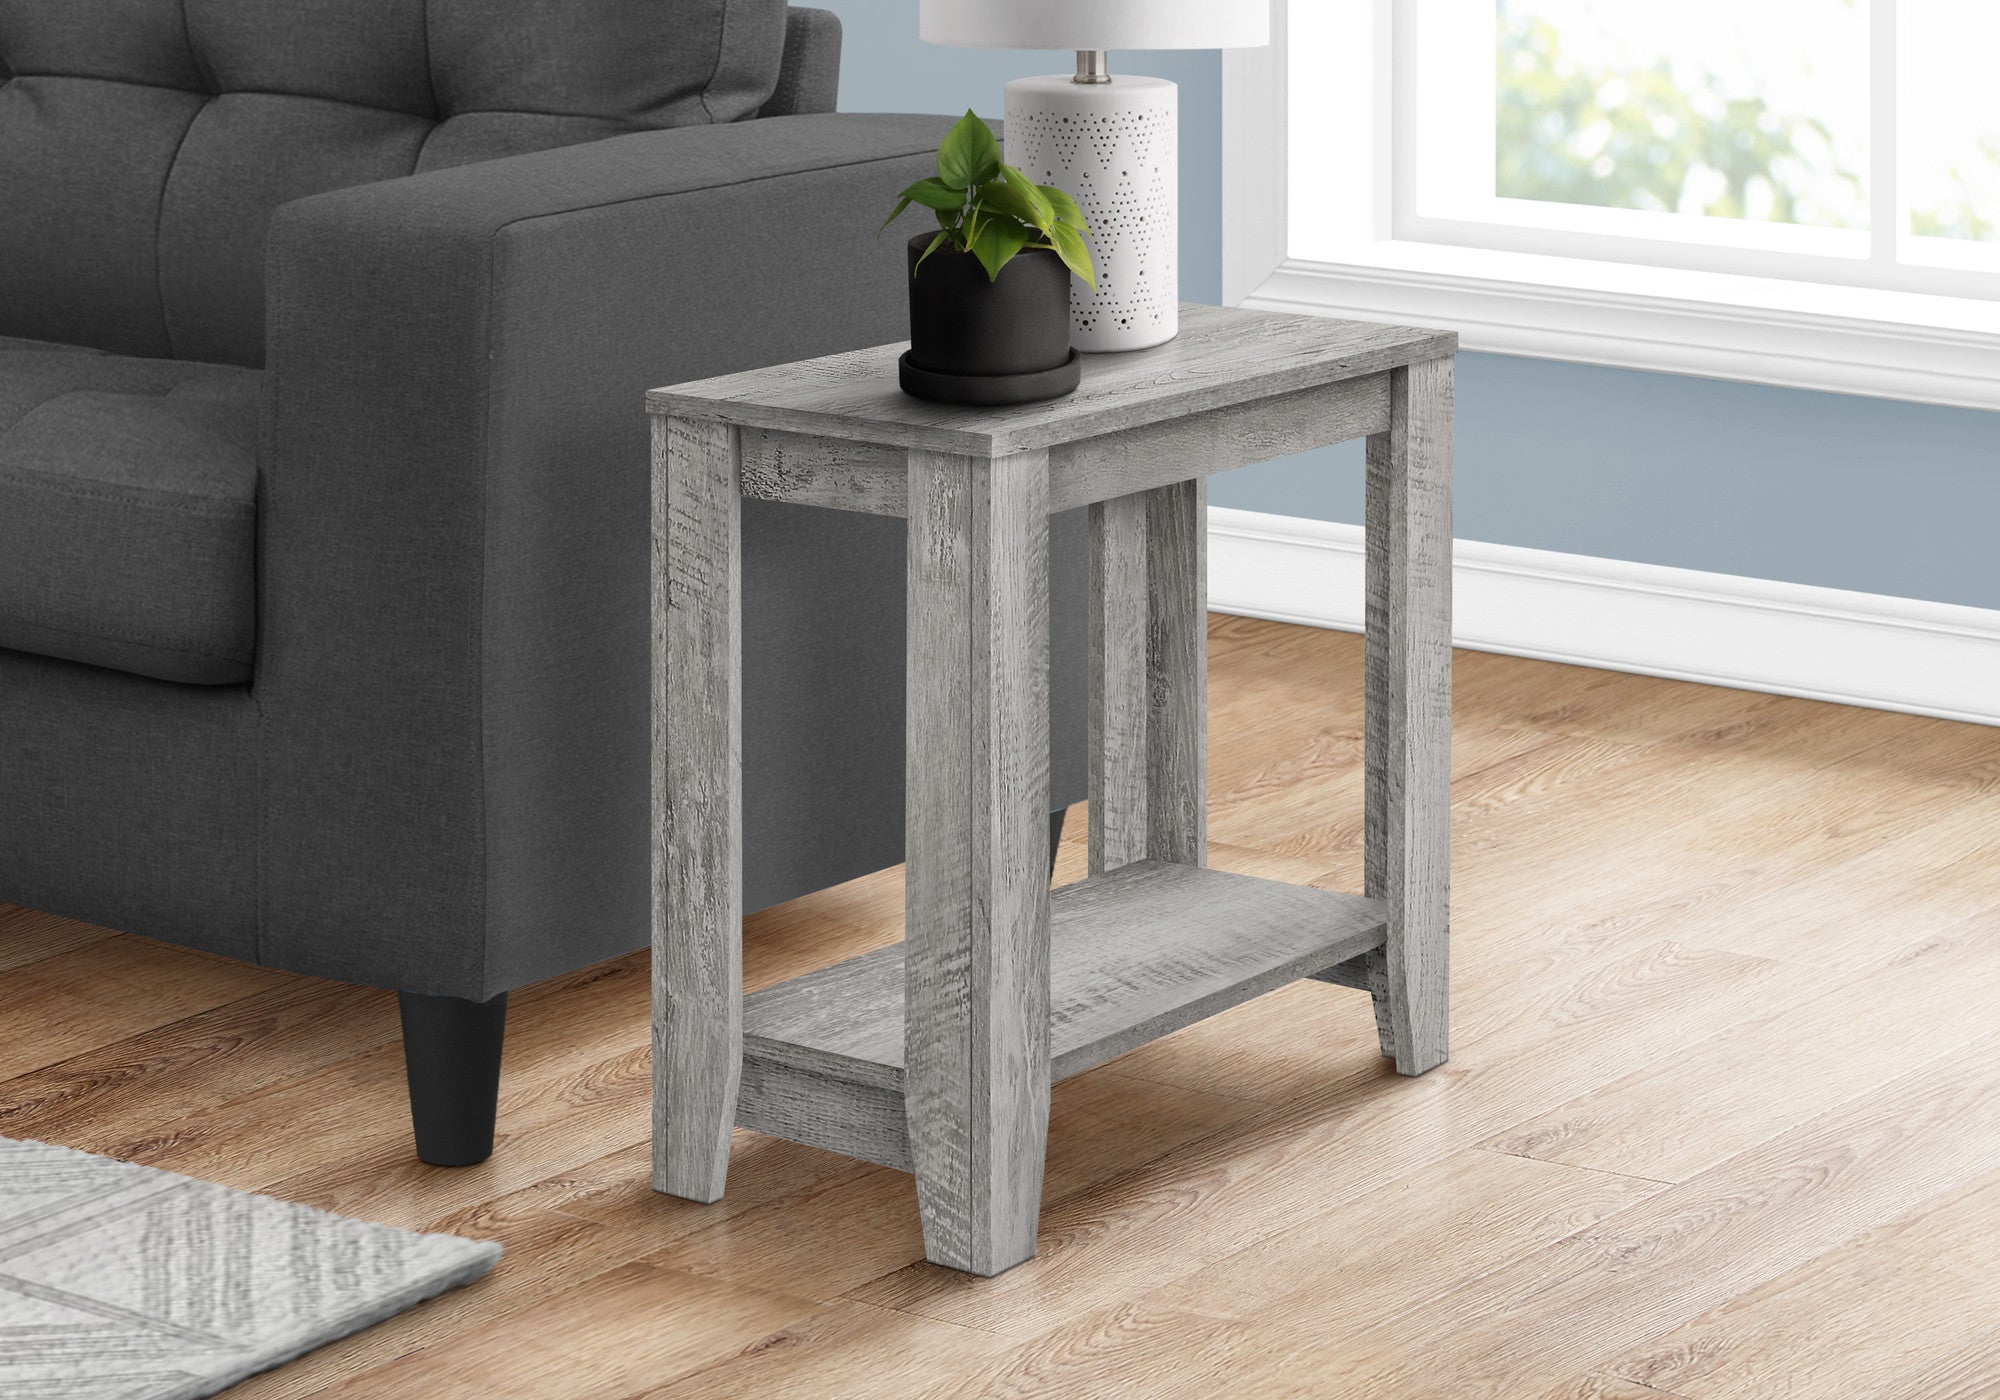 22" Grey End Table With Shelf